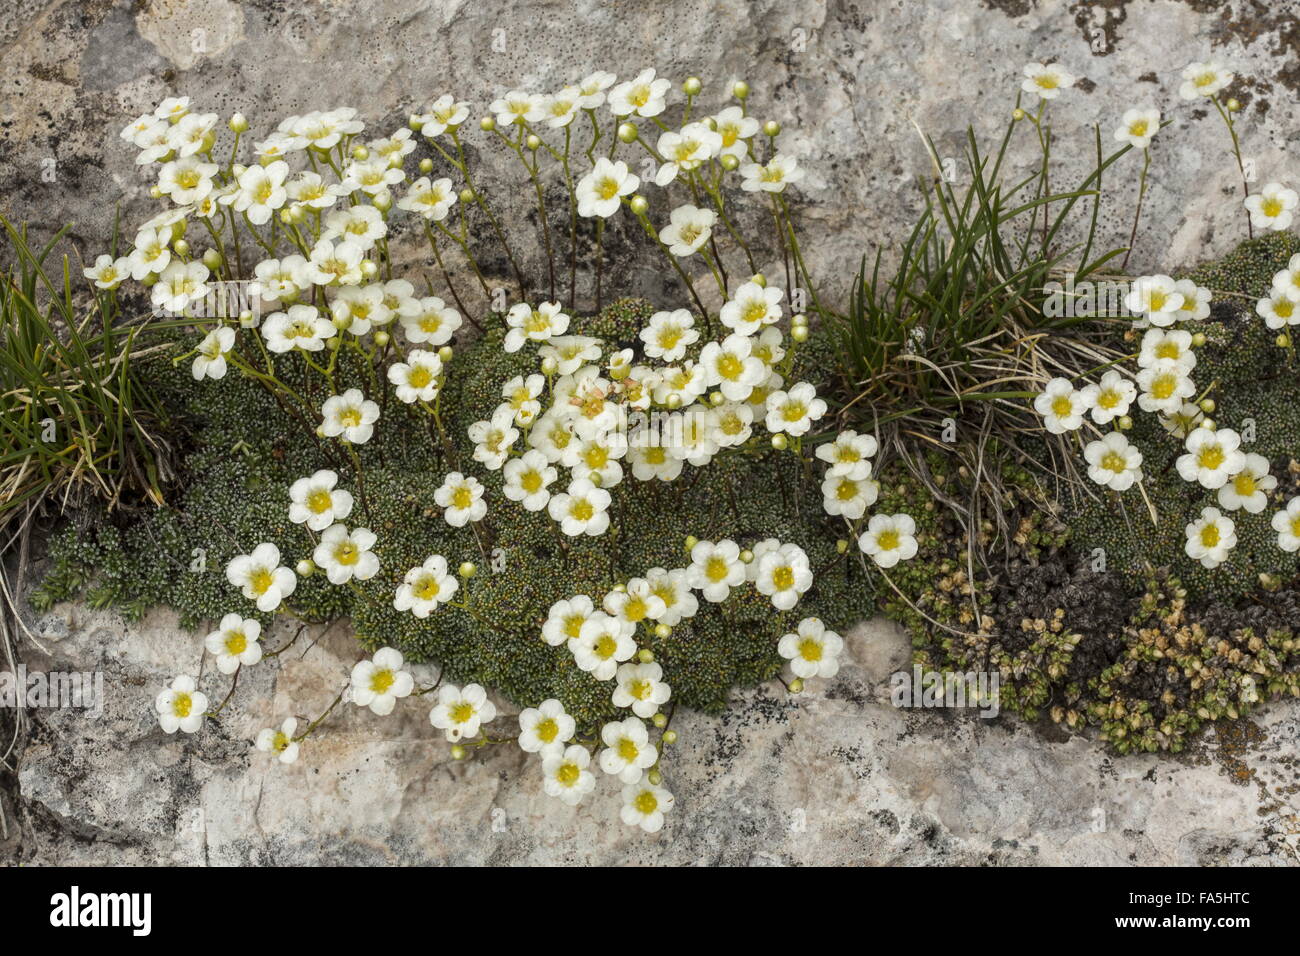 Dolomite saxifrage, Saxifraga squarrosa, in flower high in the Dolomites, Italy. Stock Photo